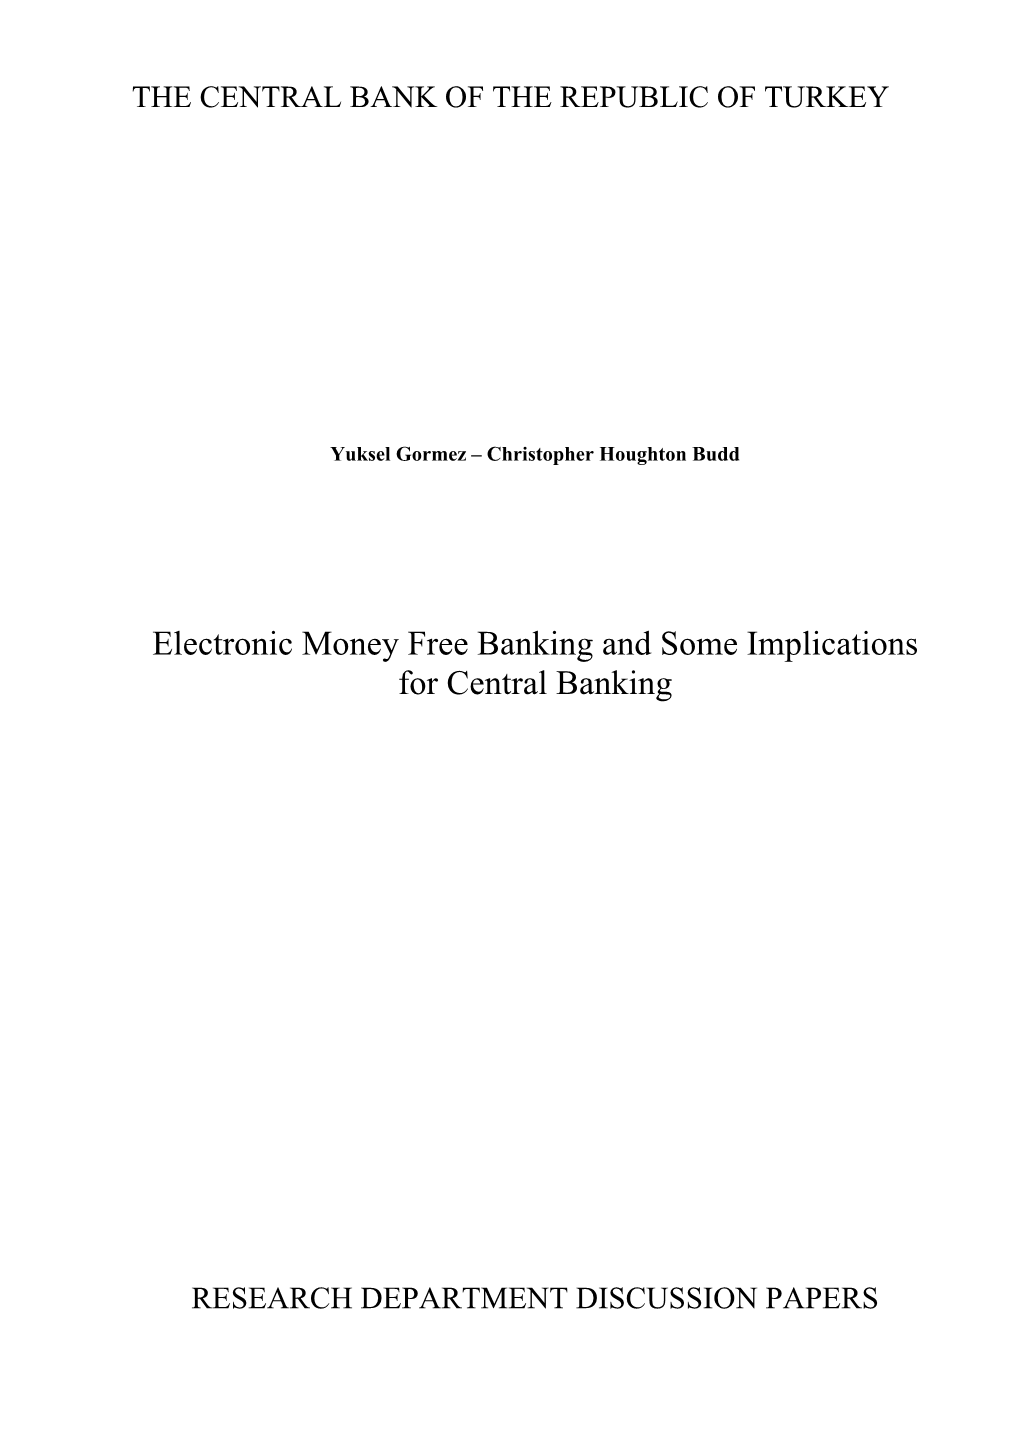 Electronic Money Free Banking and Some Implications for Central Banking